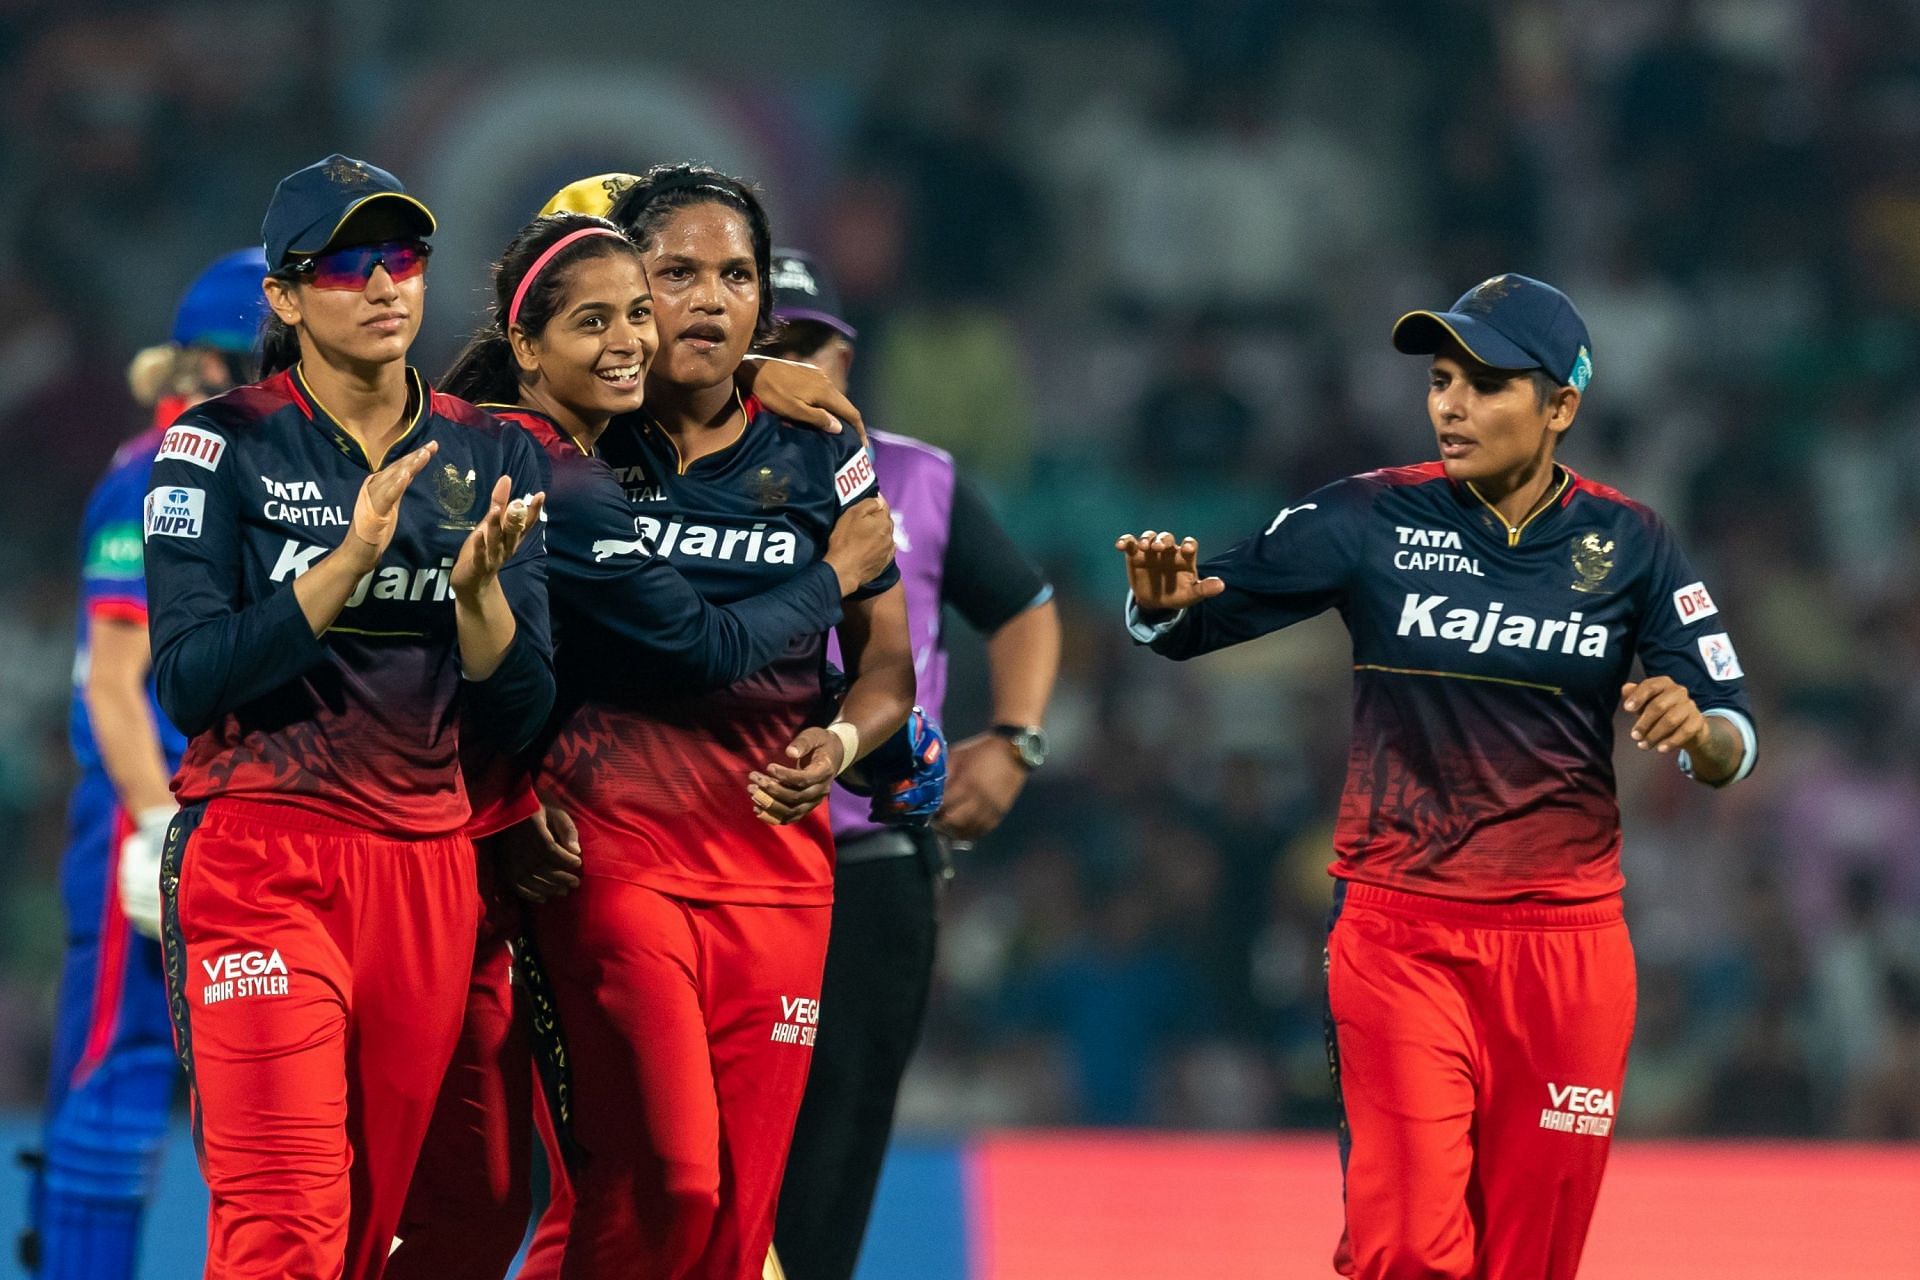 Sobhana Asha was one of the players recalled into RCB